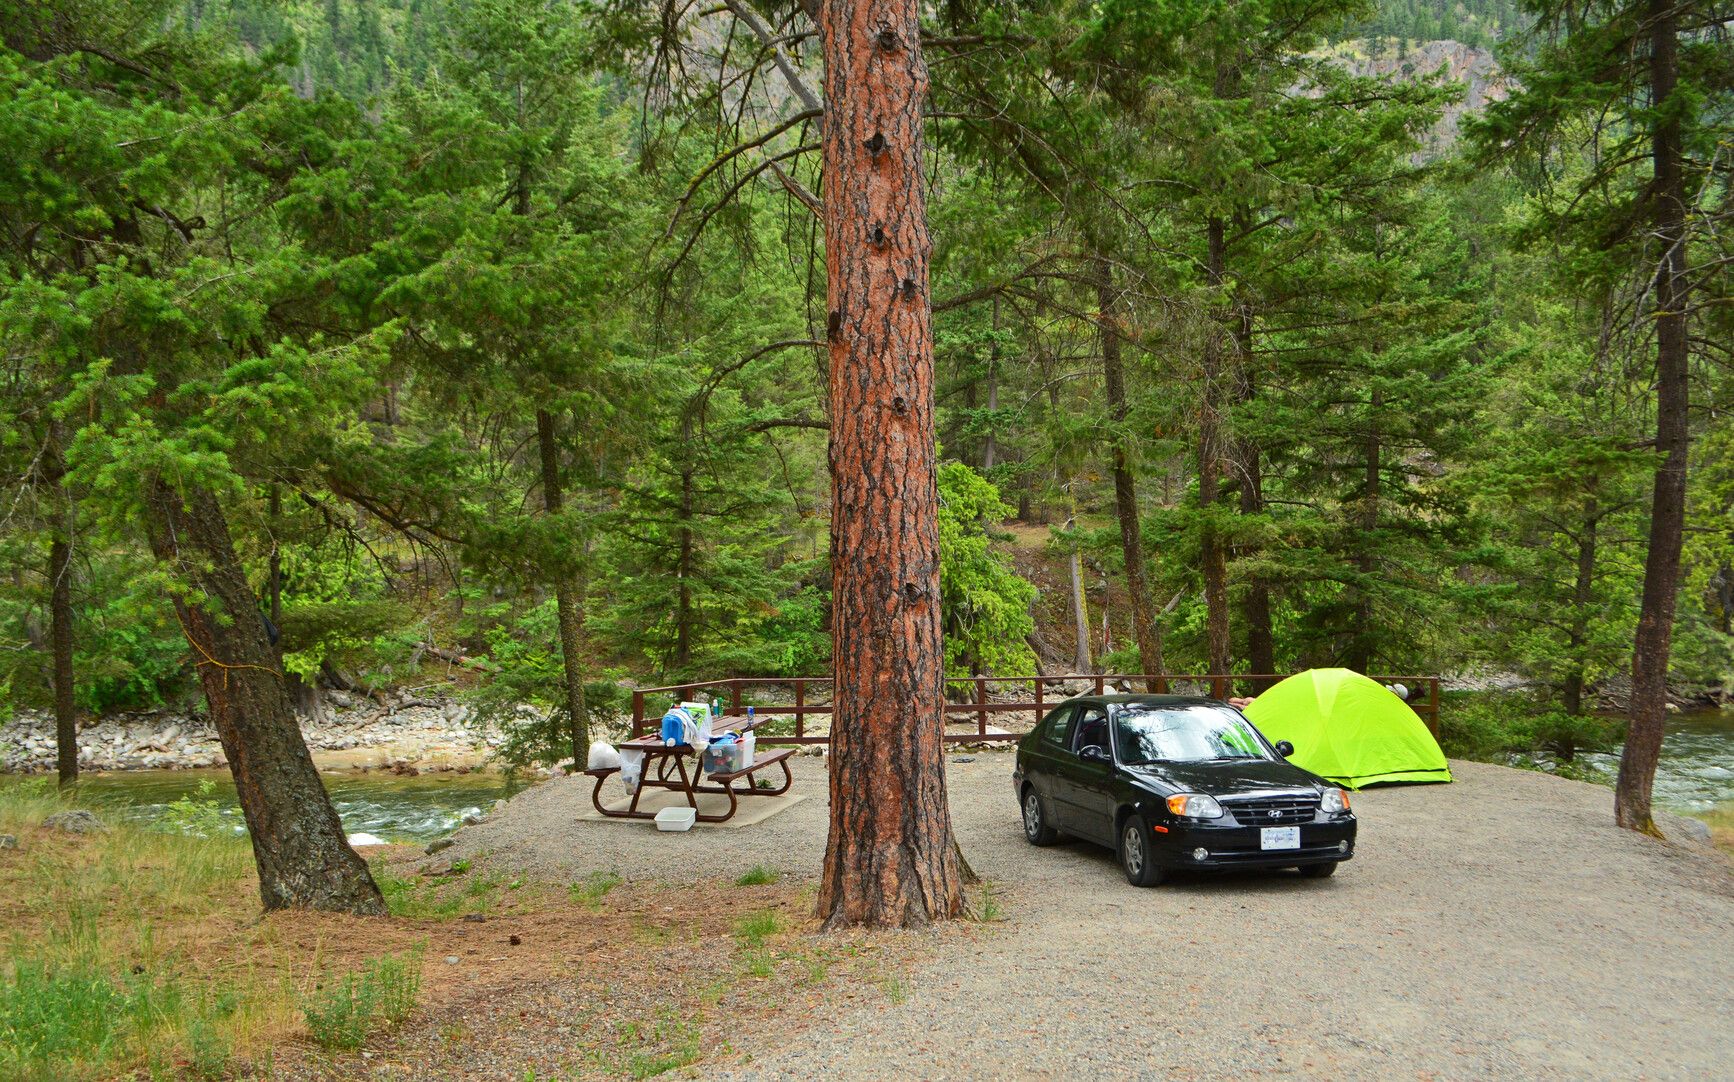 A riverside campsite in Stemwinder Park beside the Similkameen River, ideal for enjoying scenic river views and soothing sounds.